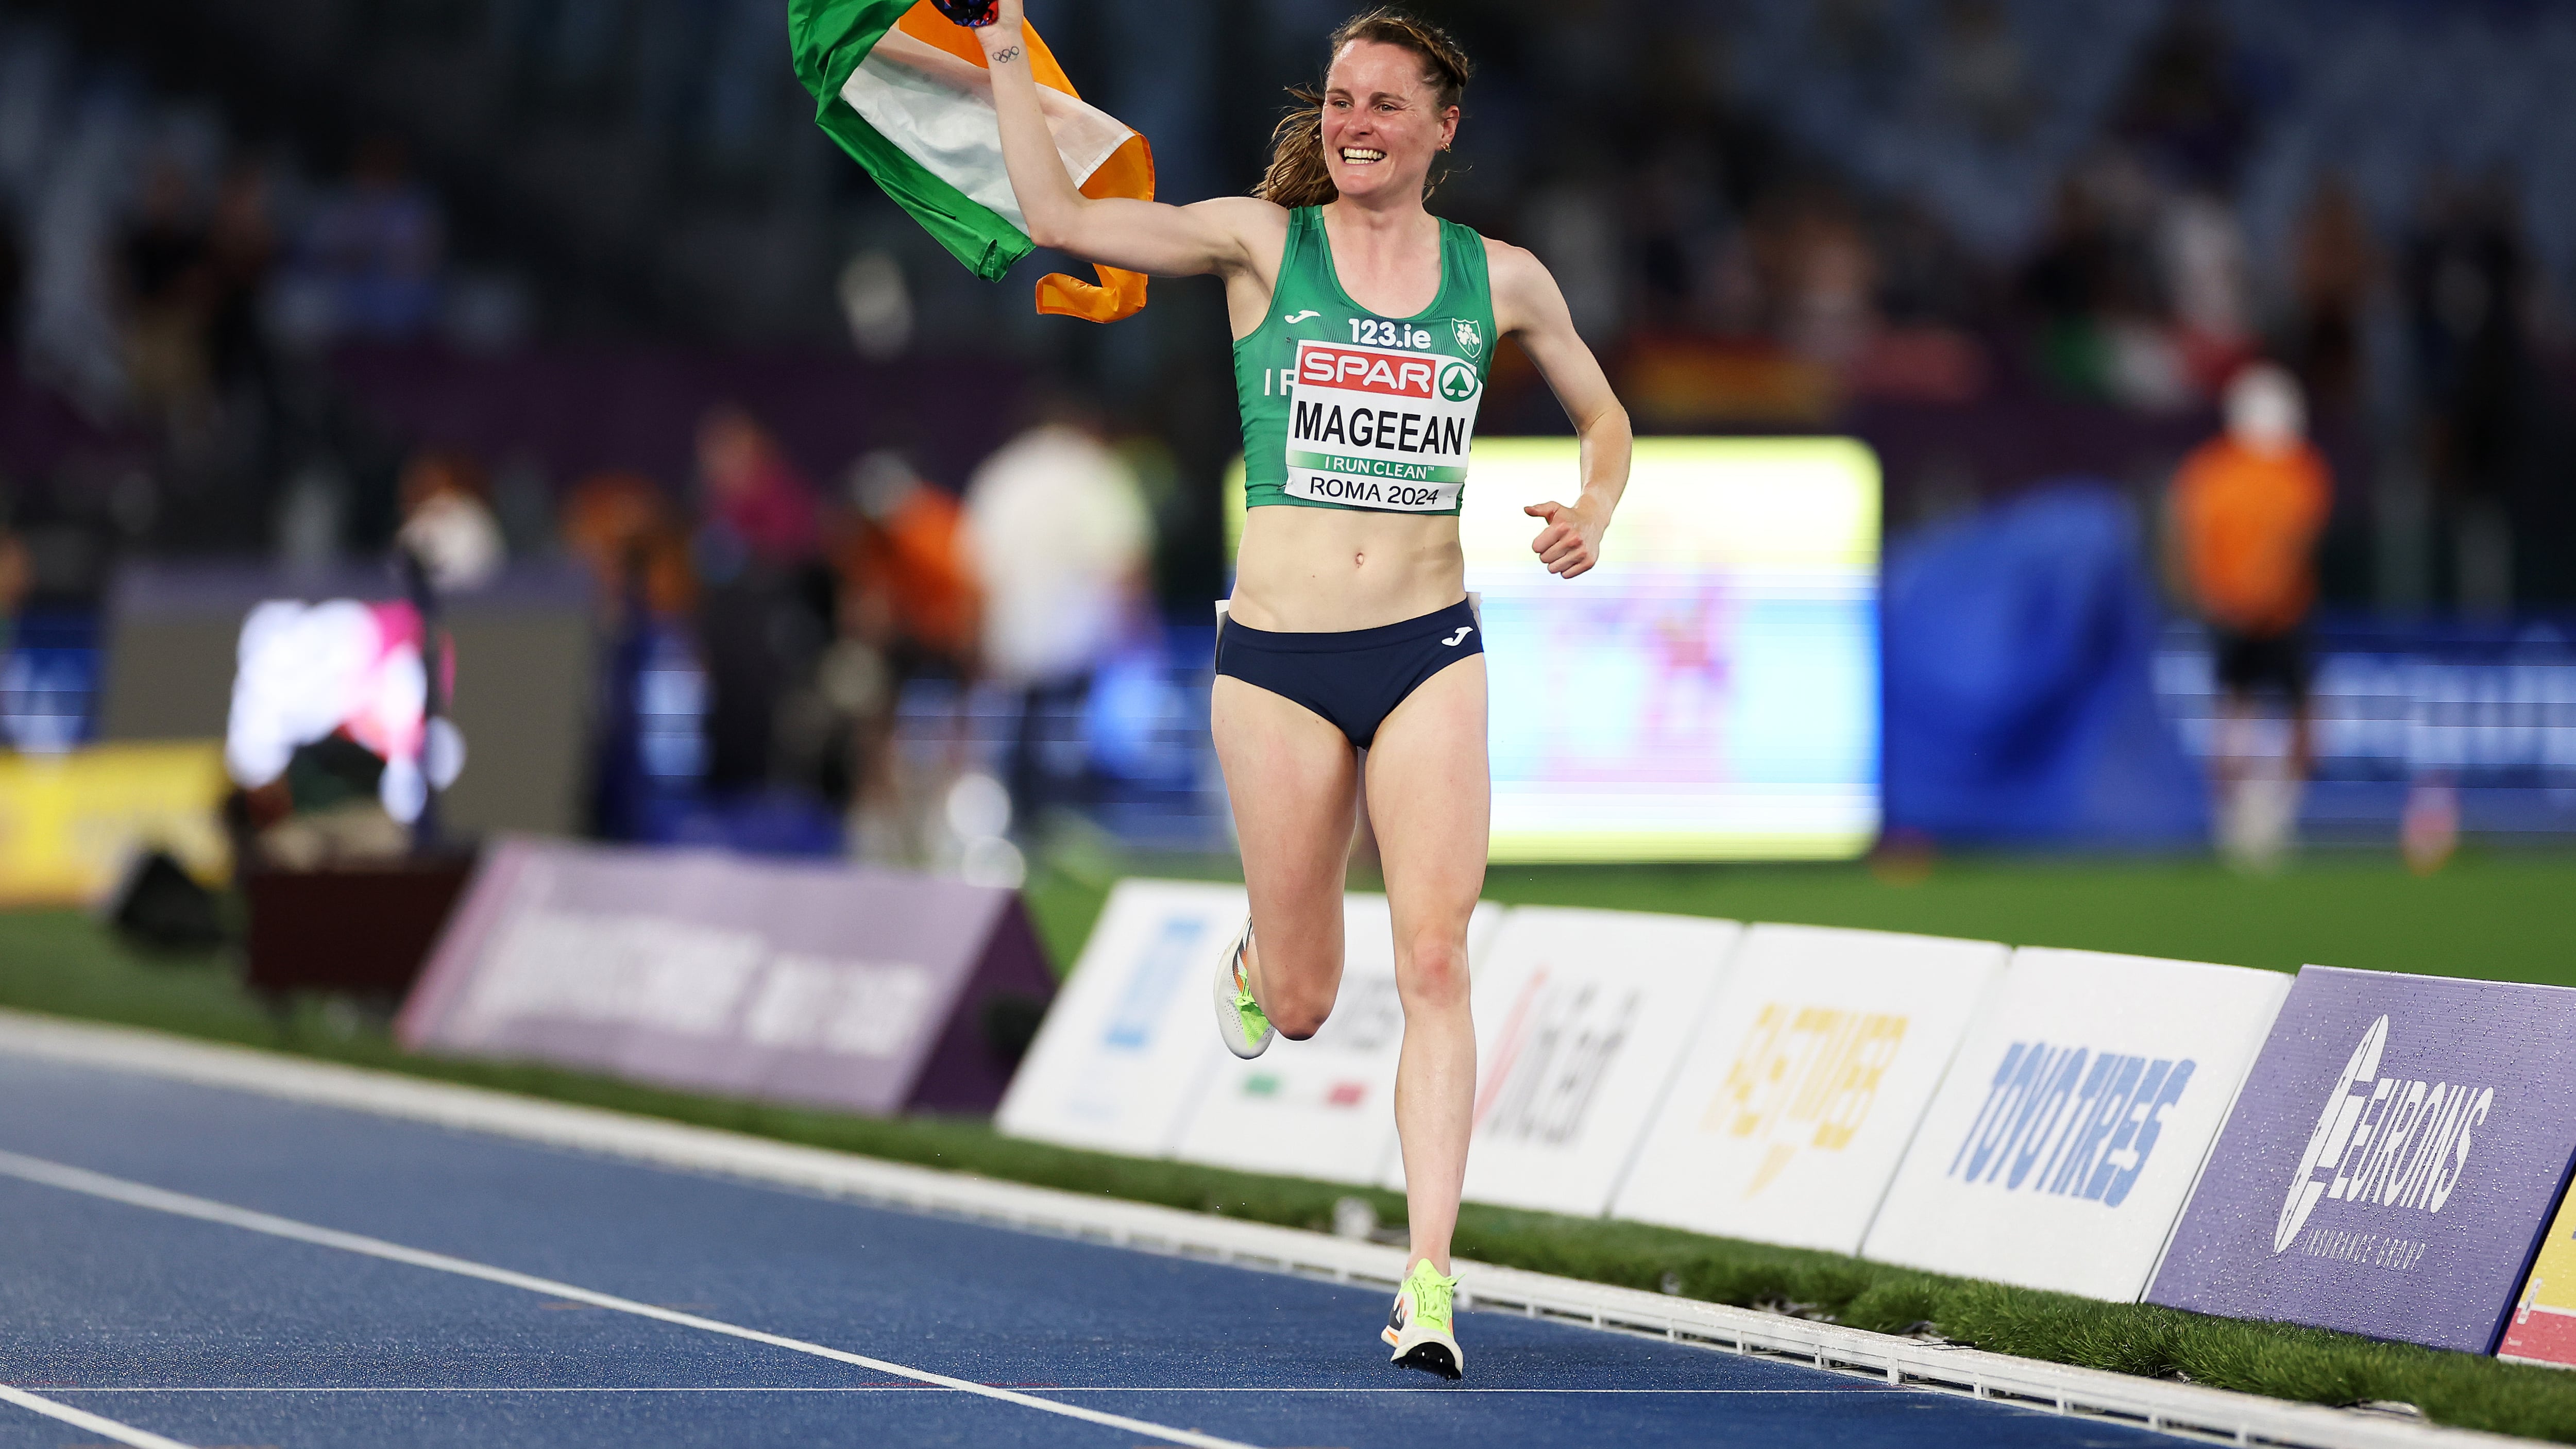 ROME, ITALY - JUNE 09: Gold medallist, Ciara Mageean of Team Ireland, celebrates after winning in the Women's 1500m Final on day three of the 26th European Athletics Championships - Rome 2024 at Stadio Olimpico on June 09, 2024 in Rome, Italy.  (Photo by Michael Steele/Getty Images)